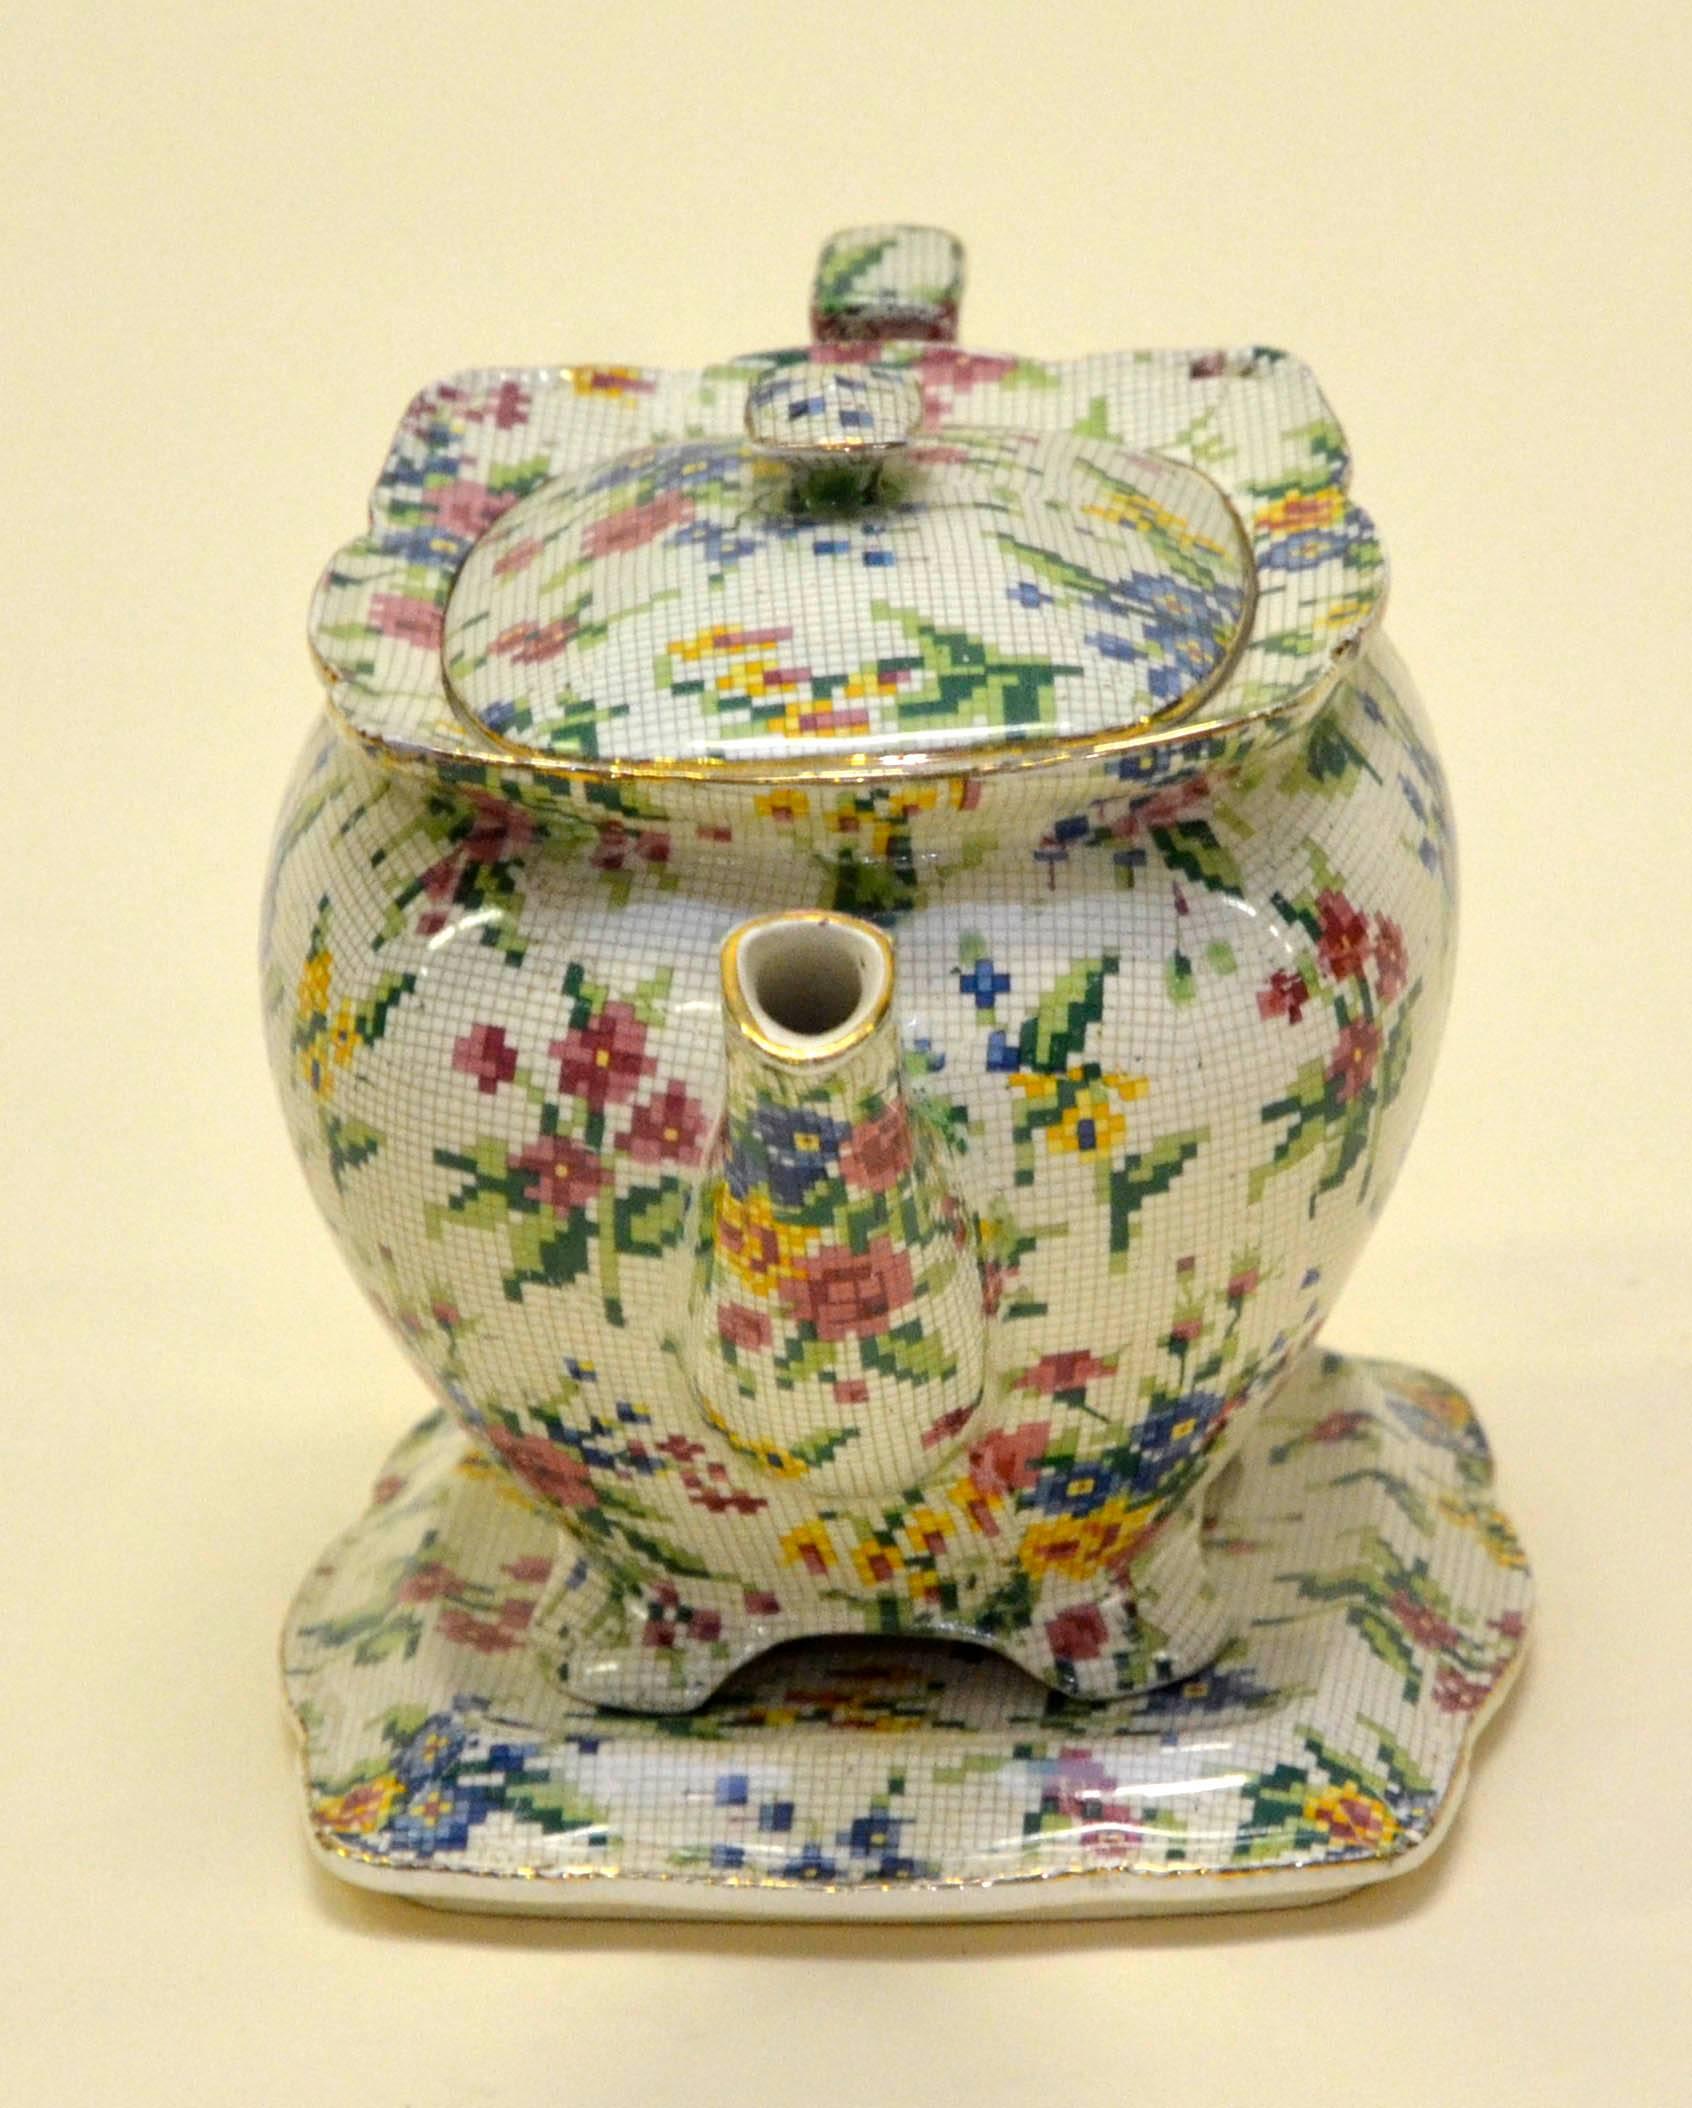 Rare Royal Winton earthenware teapot in pristine condition, not restored and ready to be used. The Queen Anne (1936) needlepoint pattern is part of the famed Chintz collection by Royal Winton. It consist of bouquets of flowers in pink, blue and